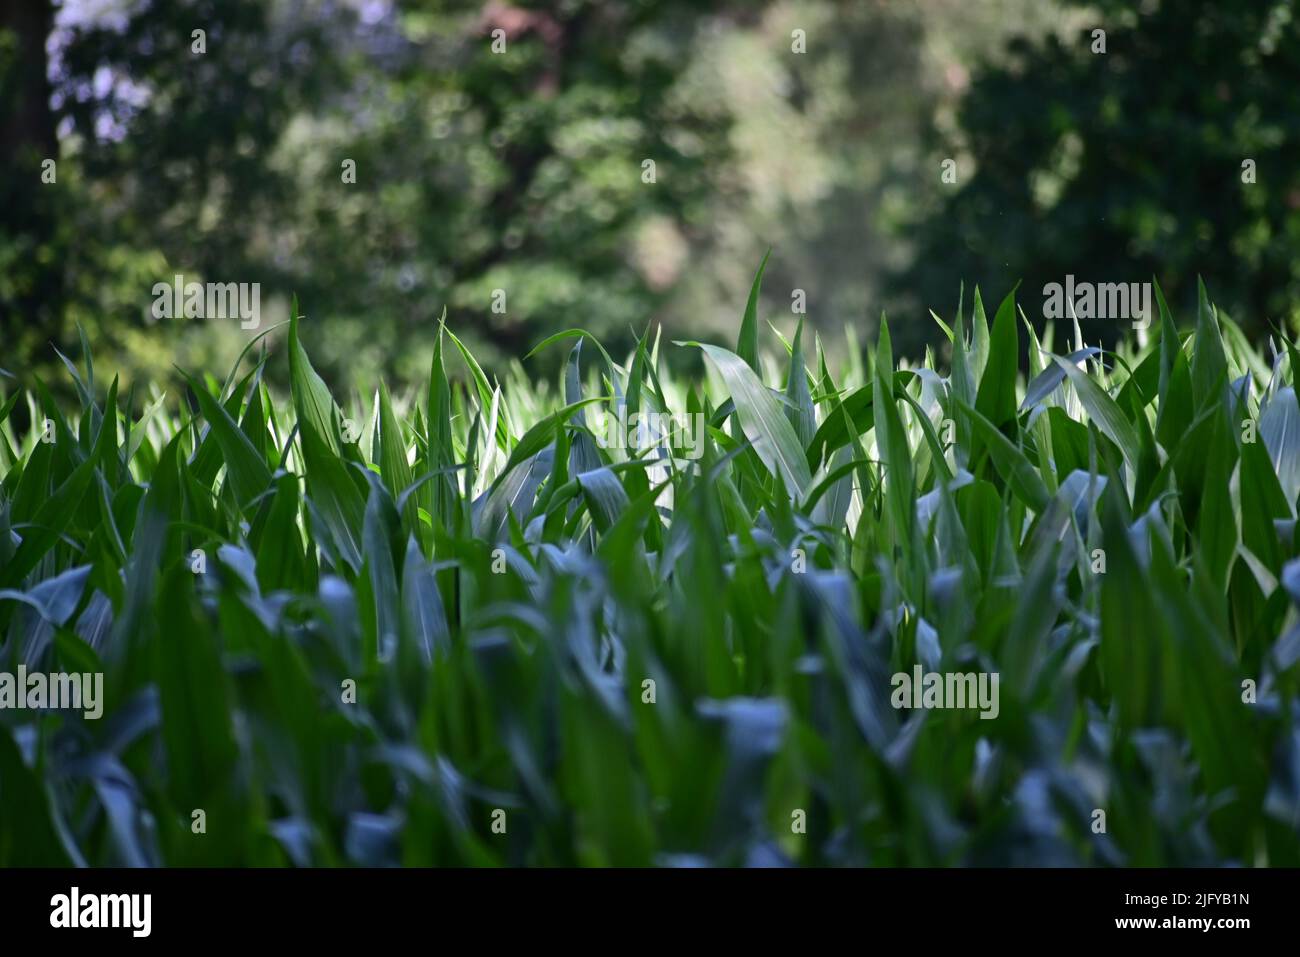 Cornfield with growing plants surrounded by trees Stock Photo